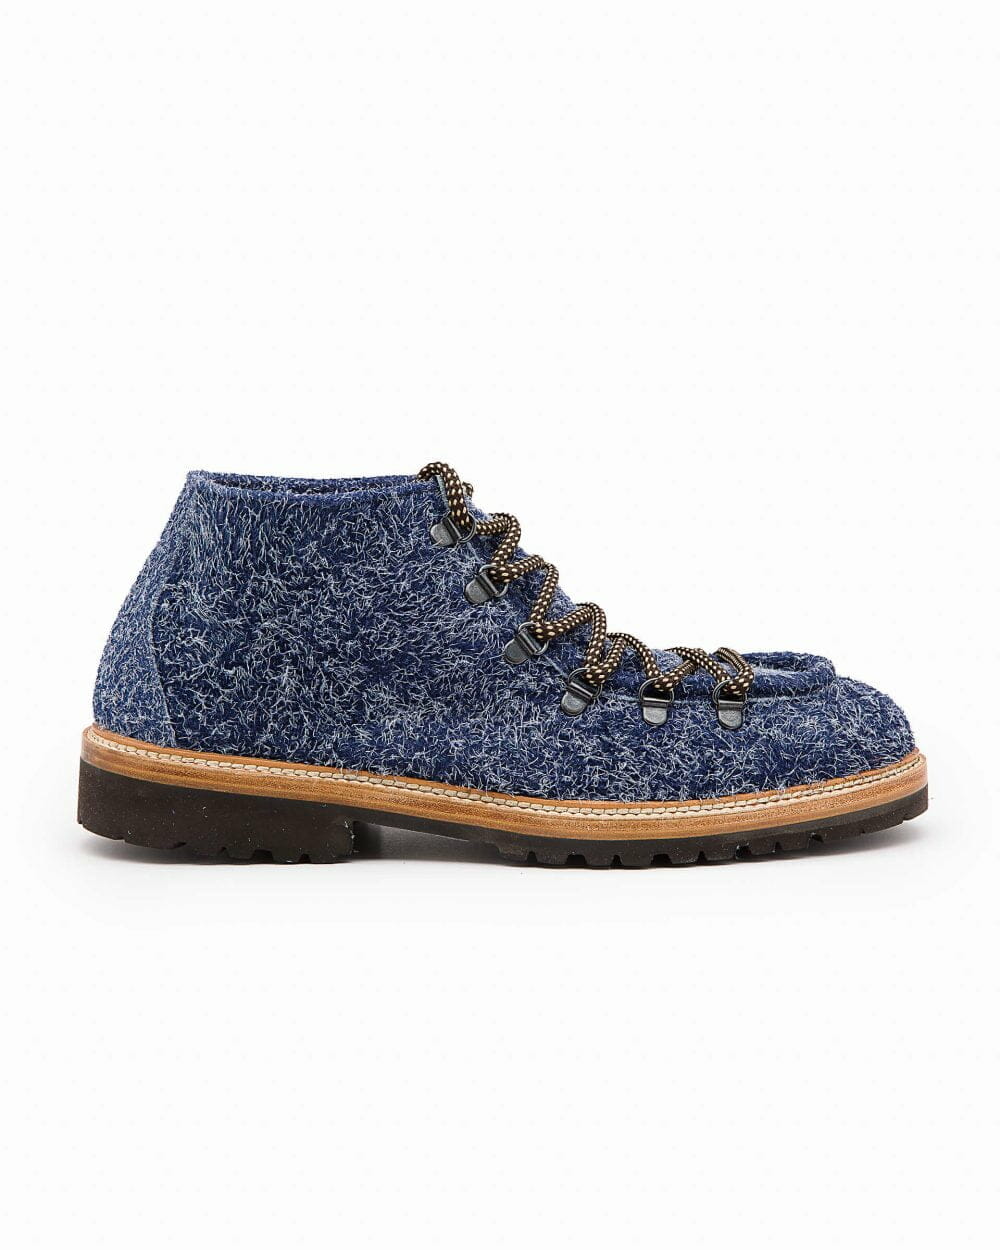 montblanc-Boots-frost-effect-suede-bois-blue-long-side